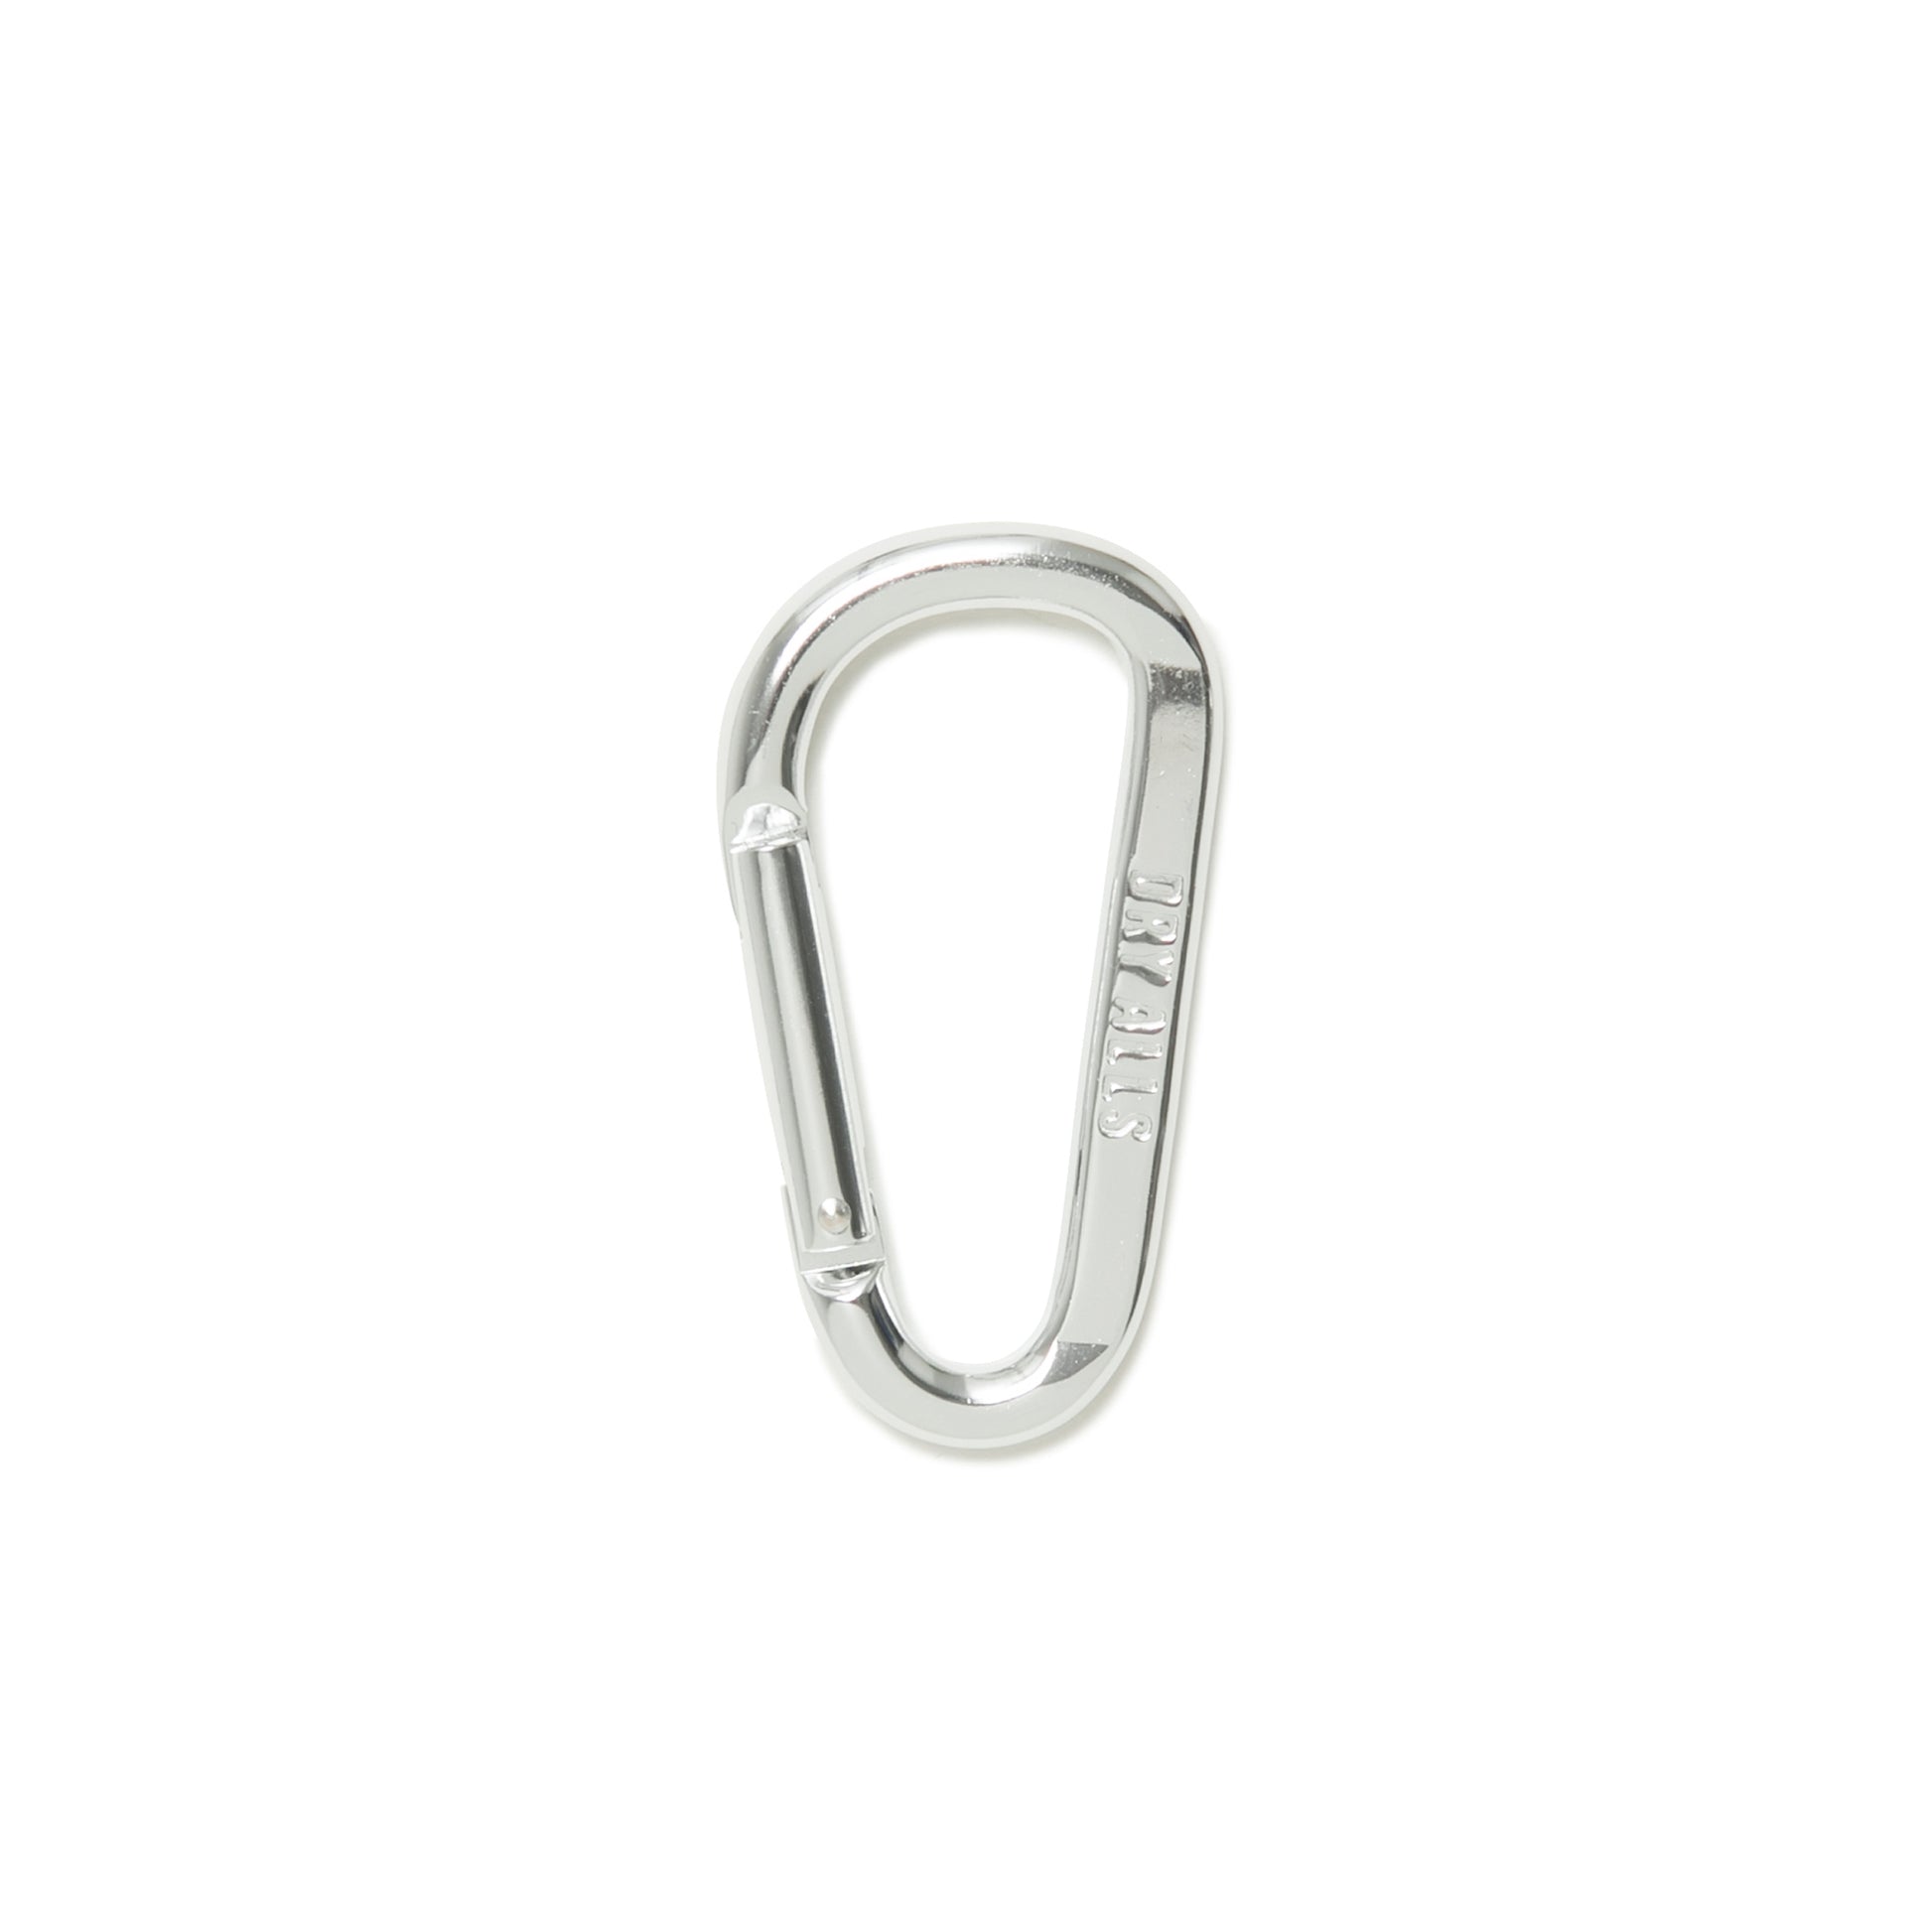 CARABINER 70mm – HUMAN MADE ONLINE STORE